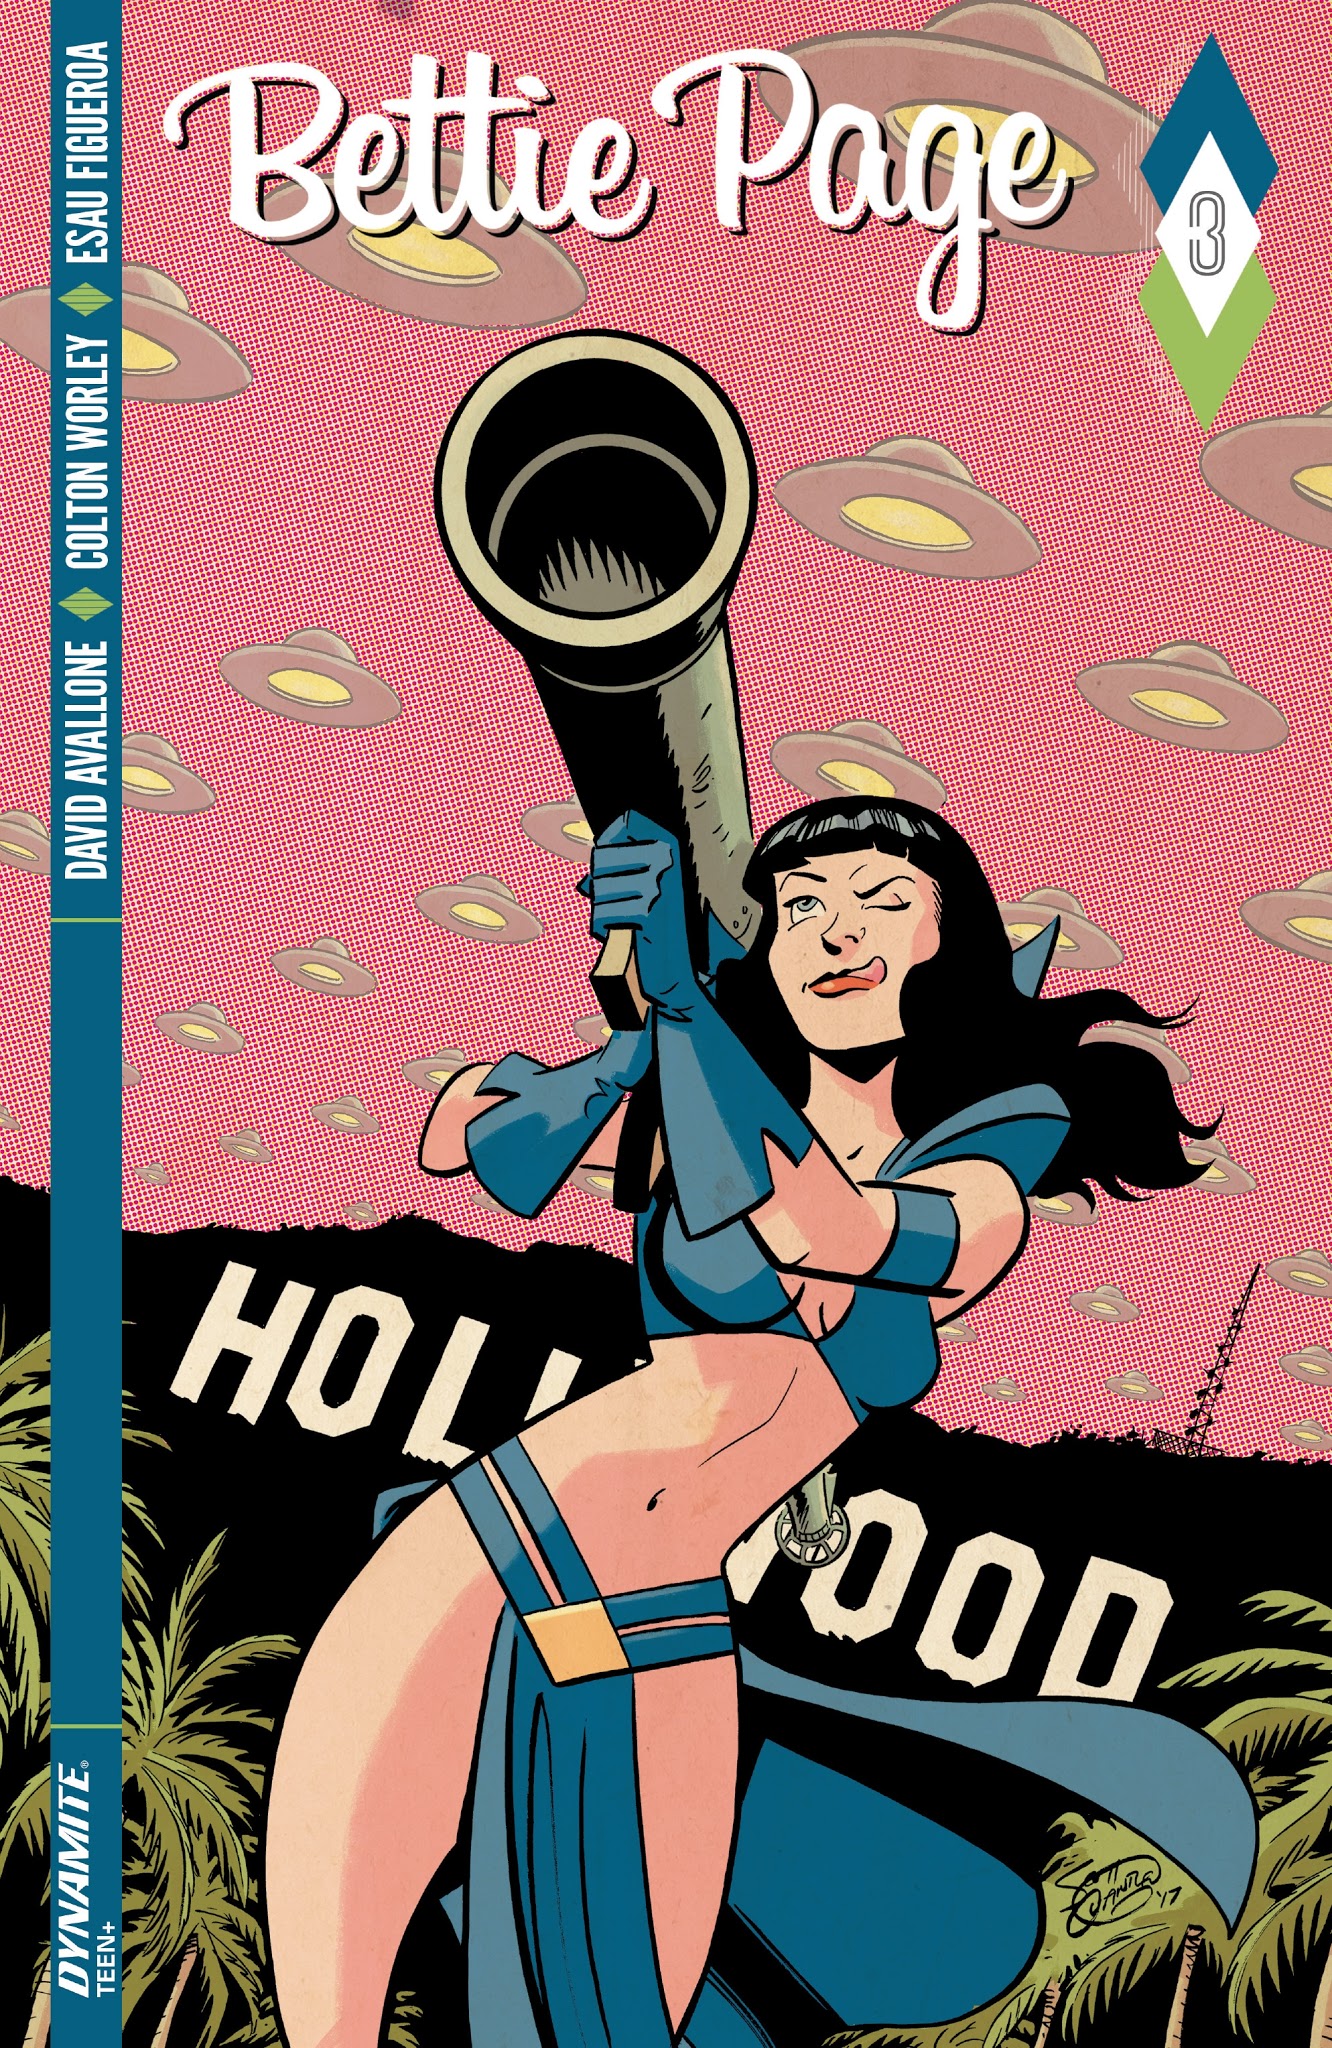 Read online Bettie Page comic -  Issue #3 - 2